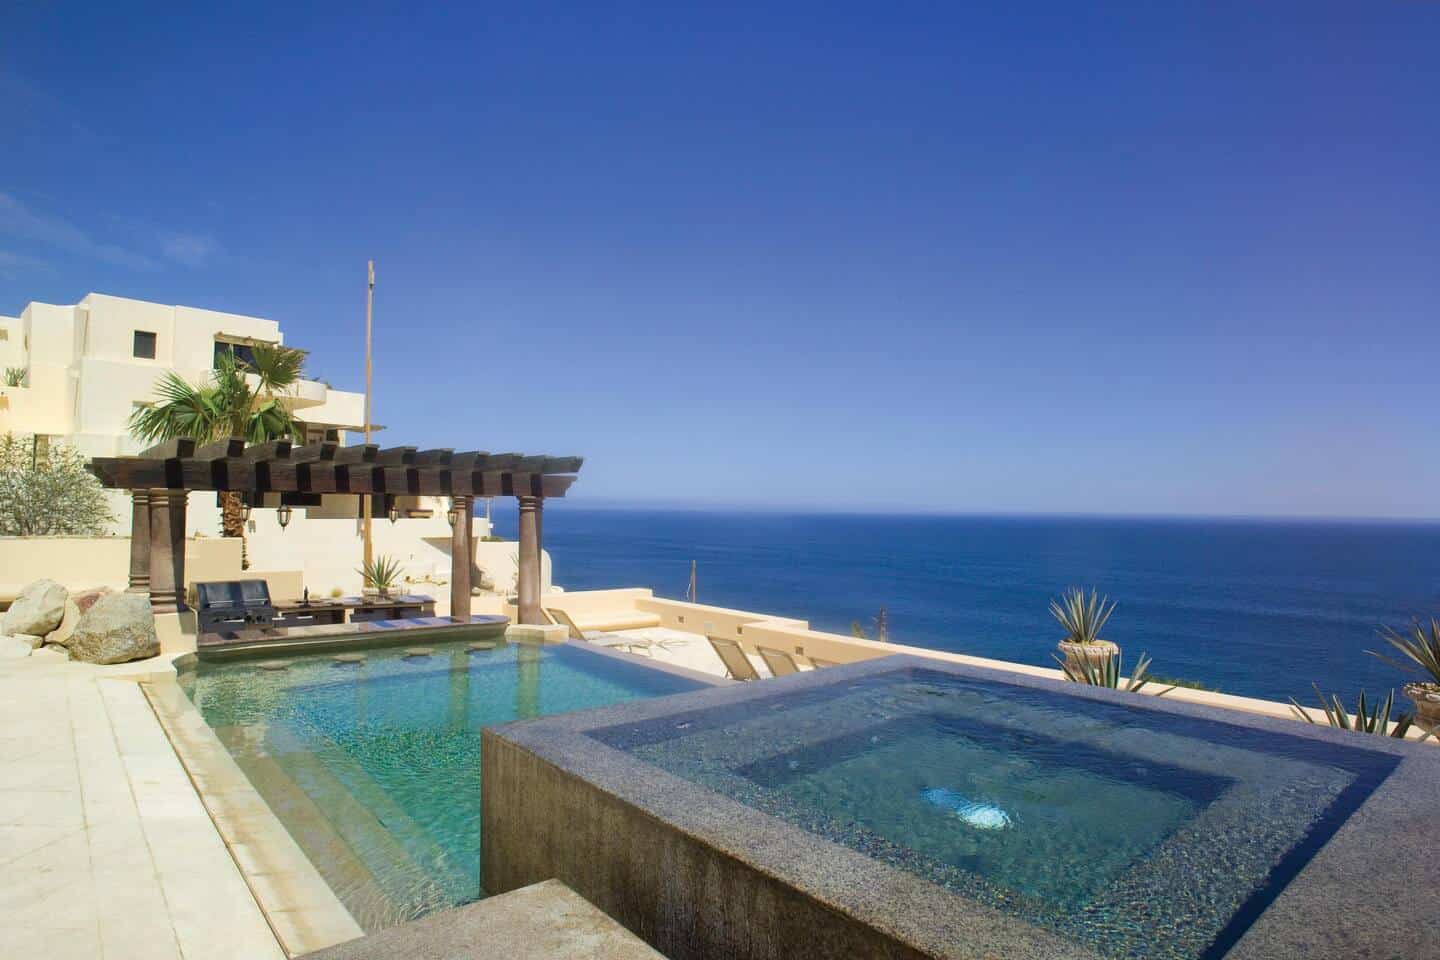 Image of Airbnb rental in Cabo San Lucas, Mexico